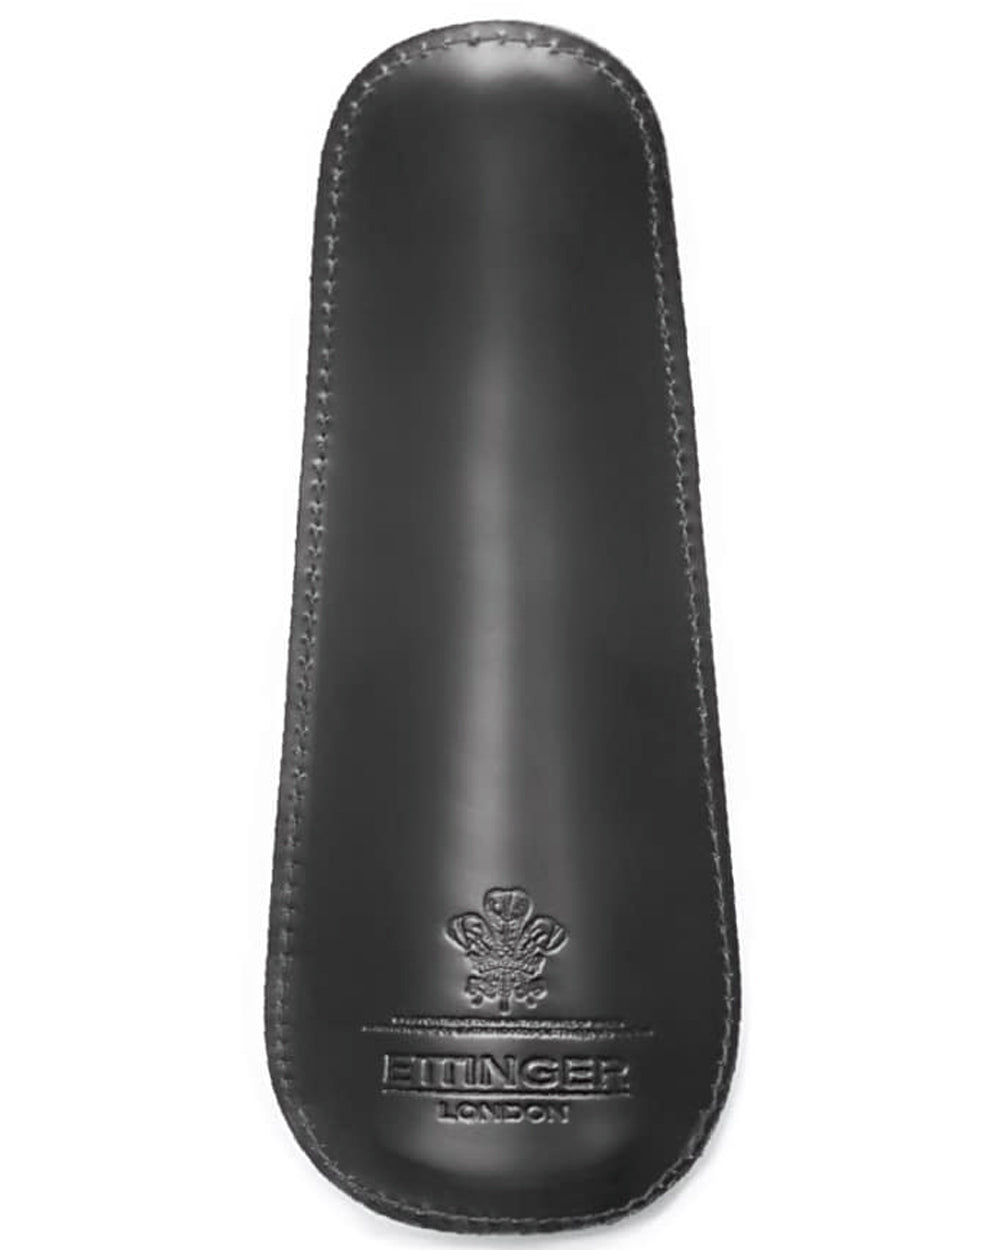 Black Small Shoehorn